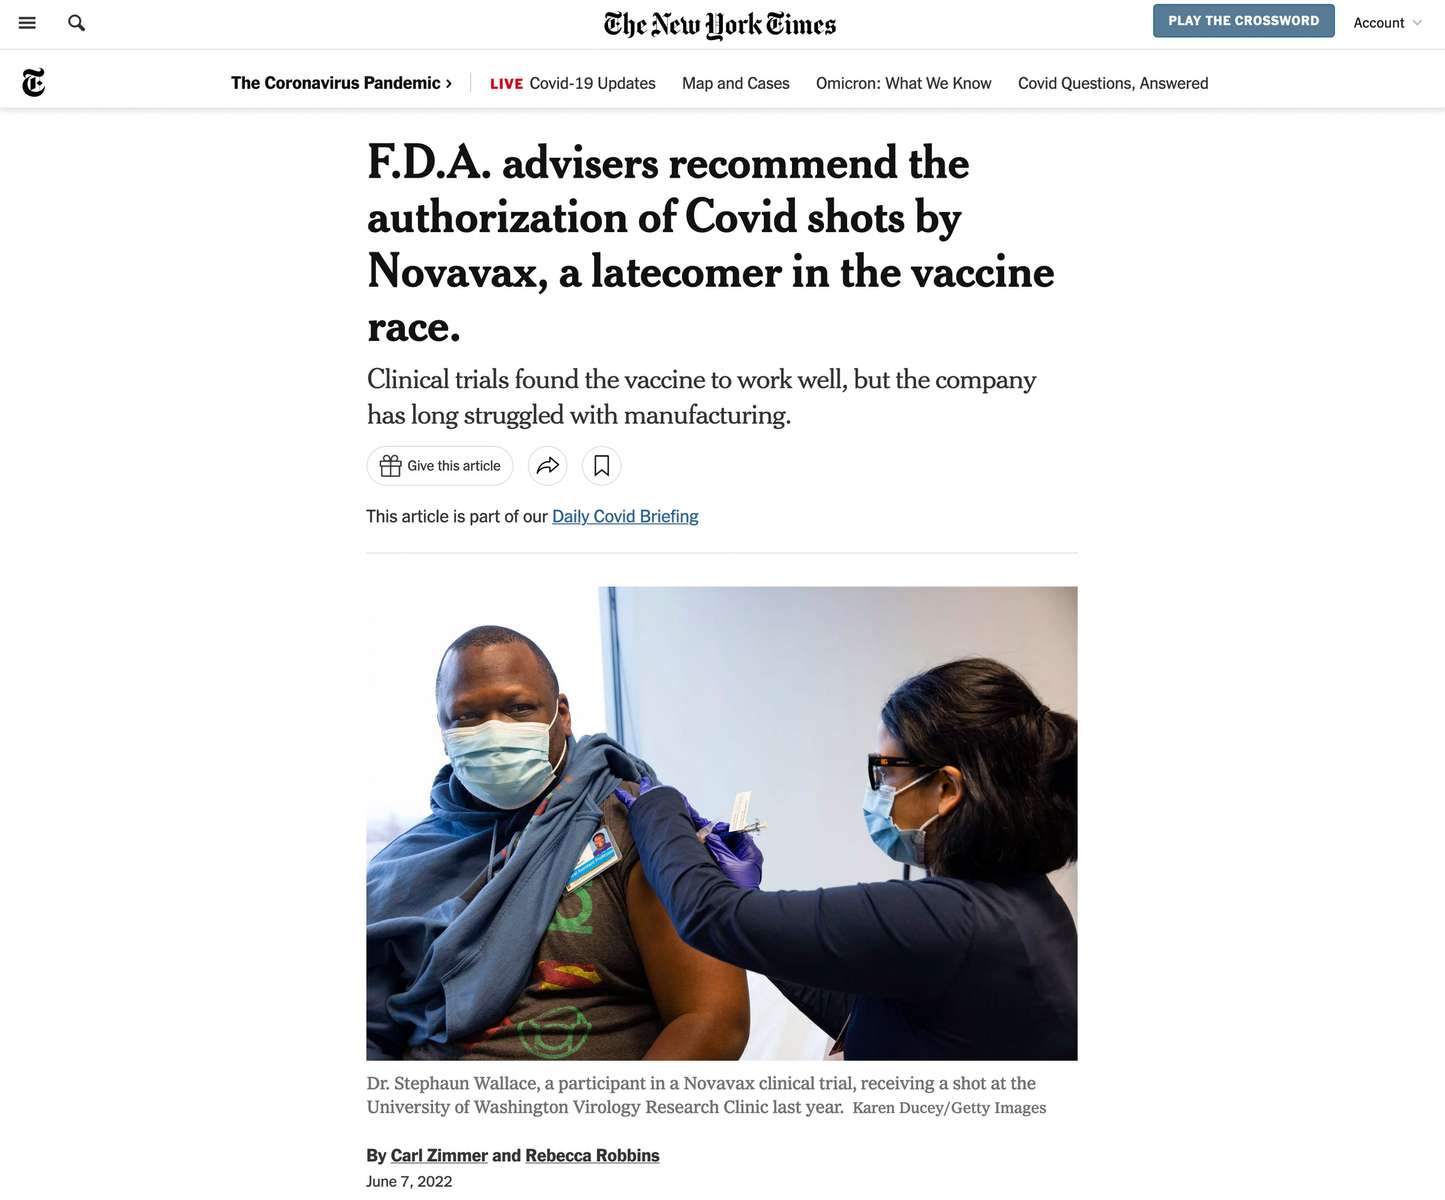 {quote}F.D.A. advisers recommend the authorization of Covid shots by Novavax, a latecomer in the vaccine race.{quote} for Getty Images, published in the New York Times on June 7, 2022. 